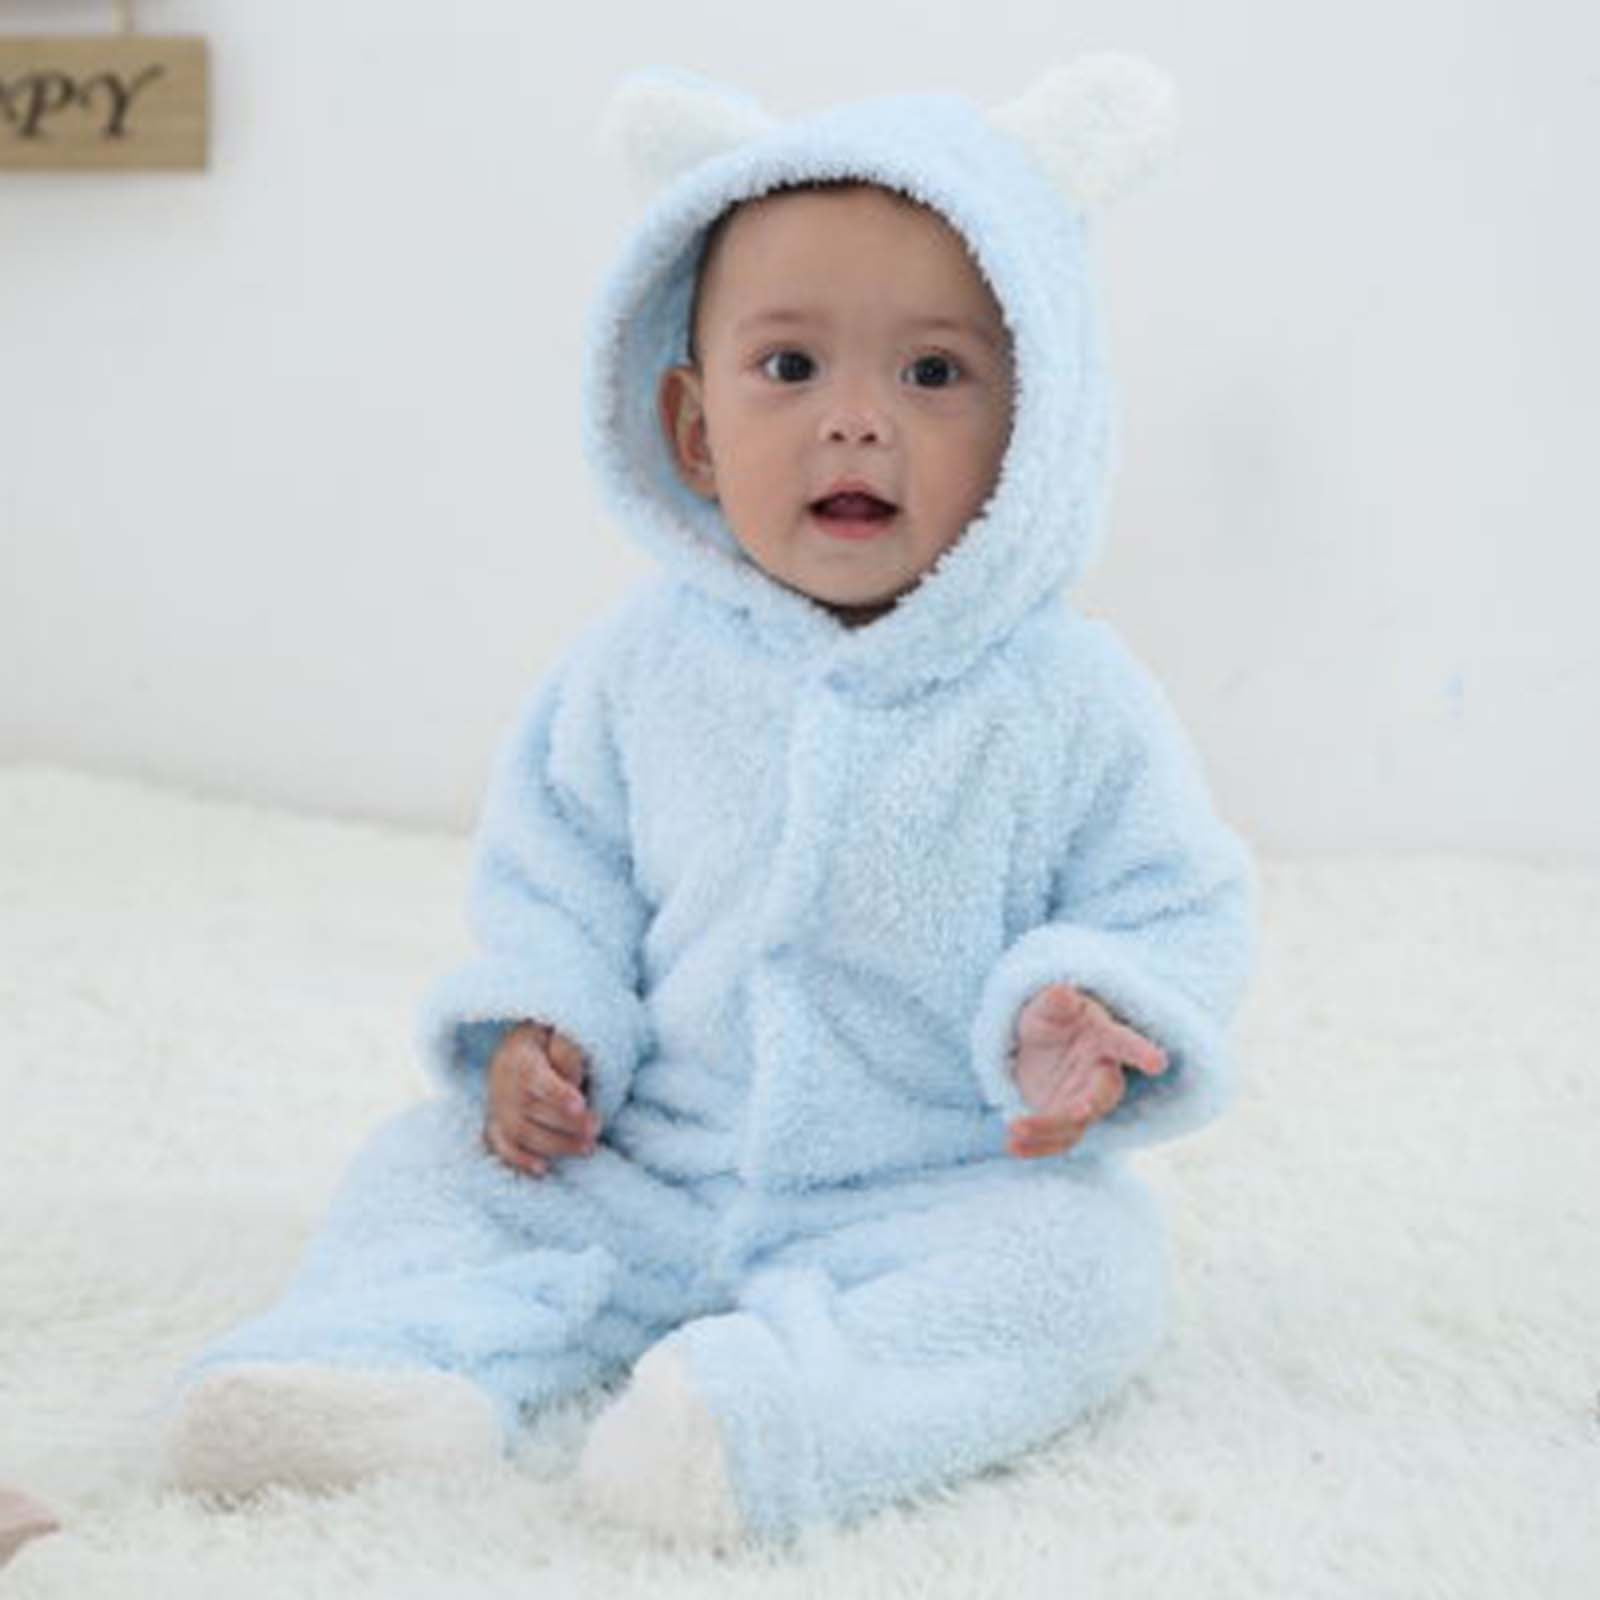 Unisex Red Plaid Hooded Fleece Plaid Jumpsuit For Newborns Long Sleeve  Winter Clothing From Bai08, $11.47 | DHgate.Com